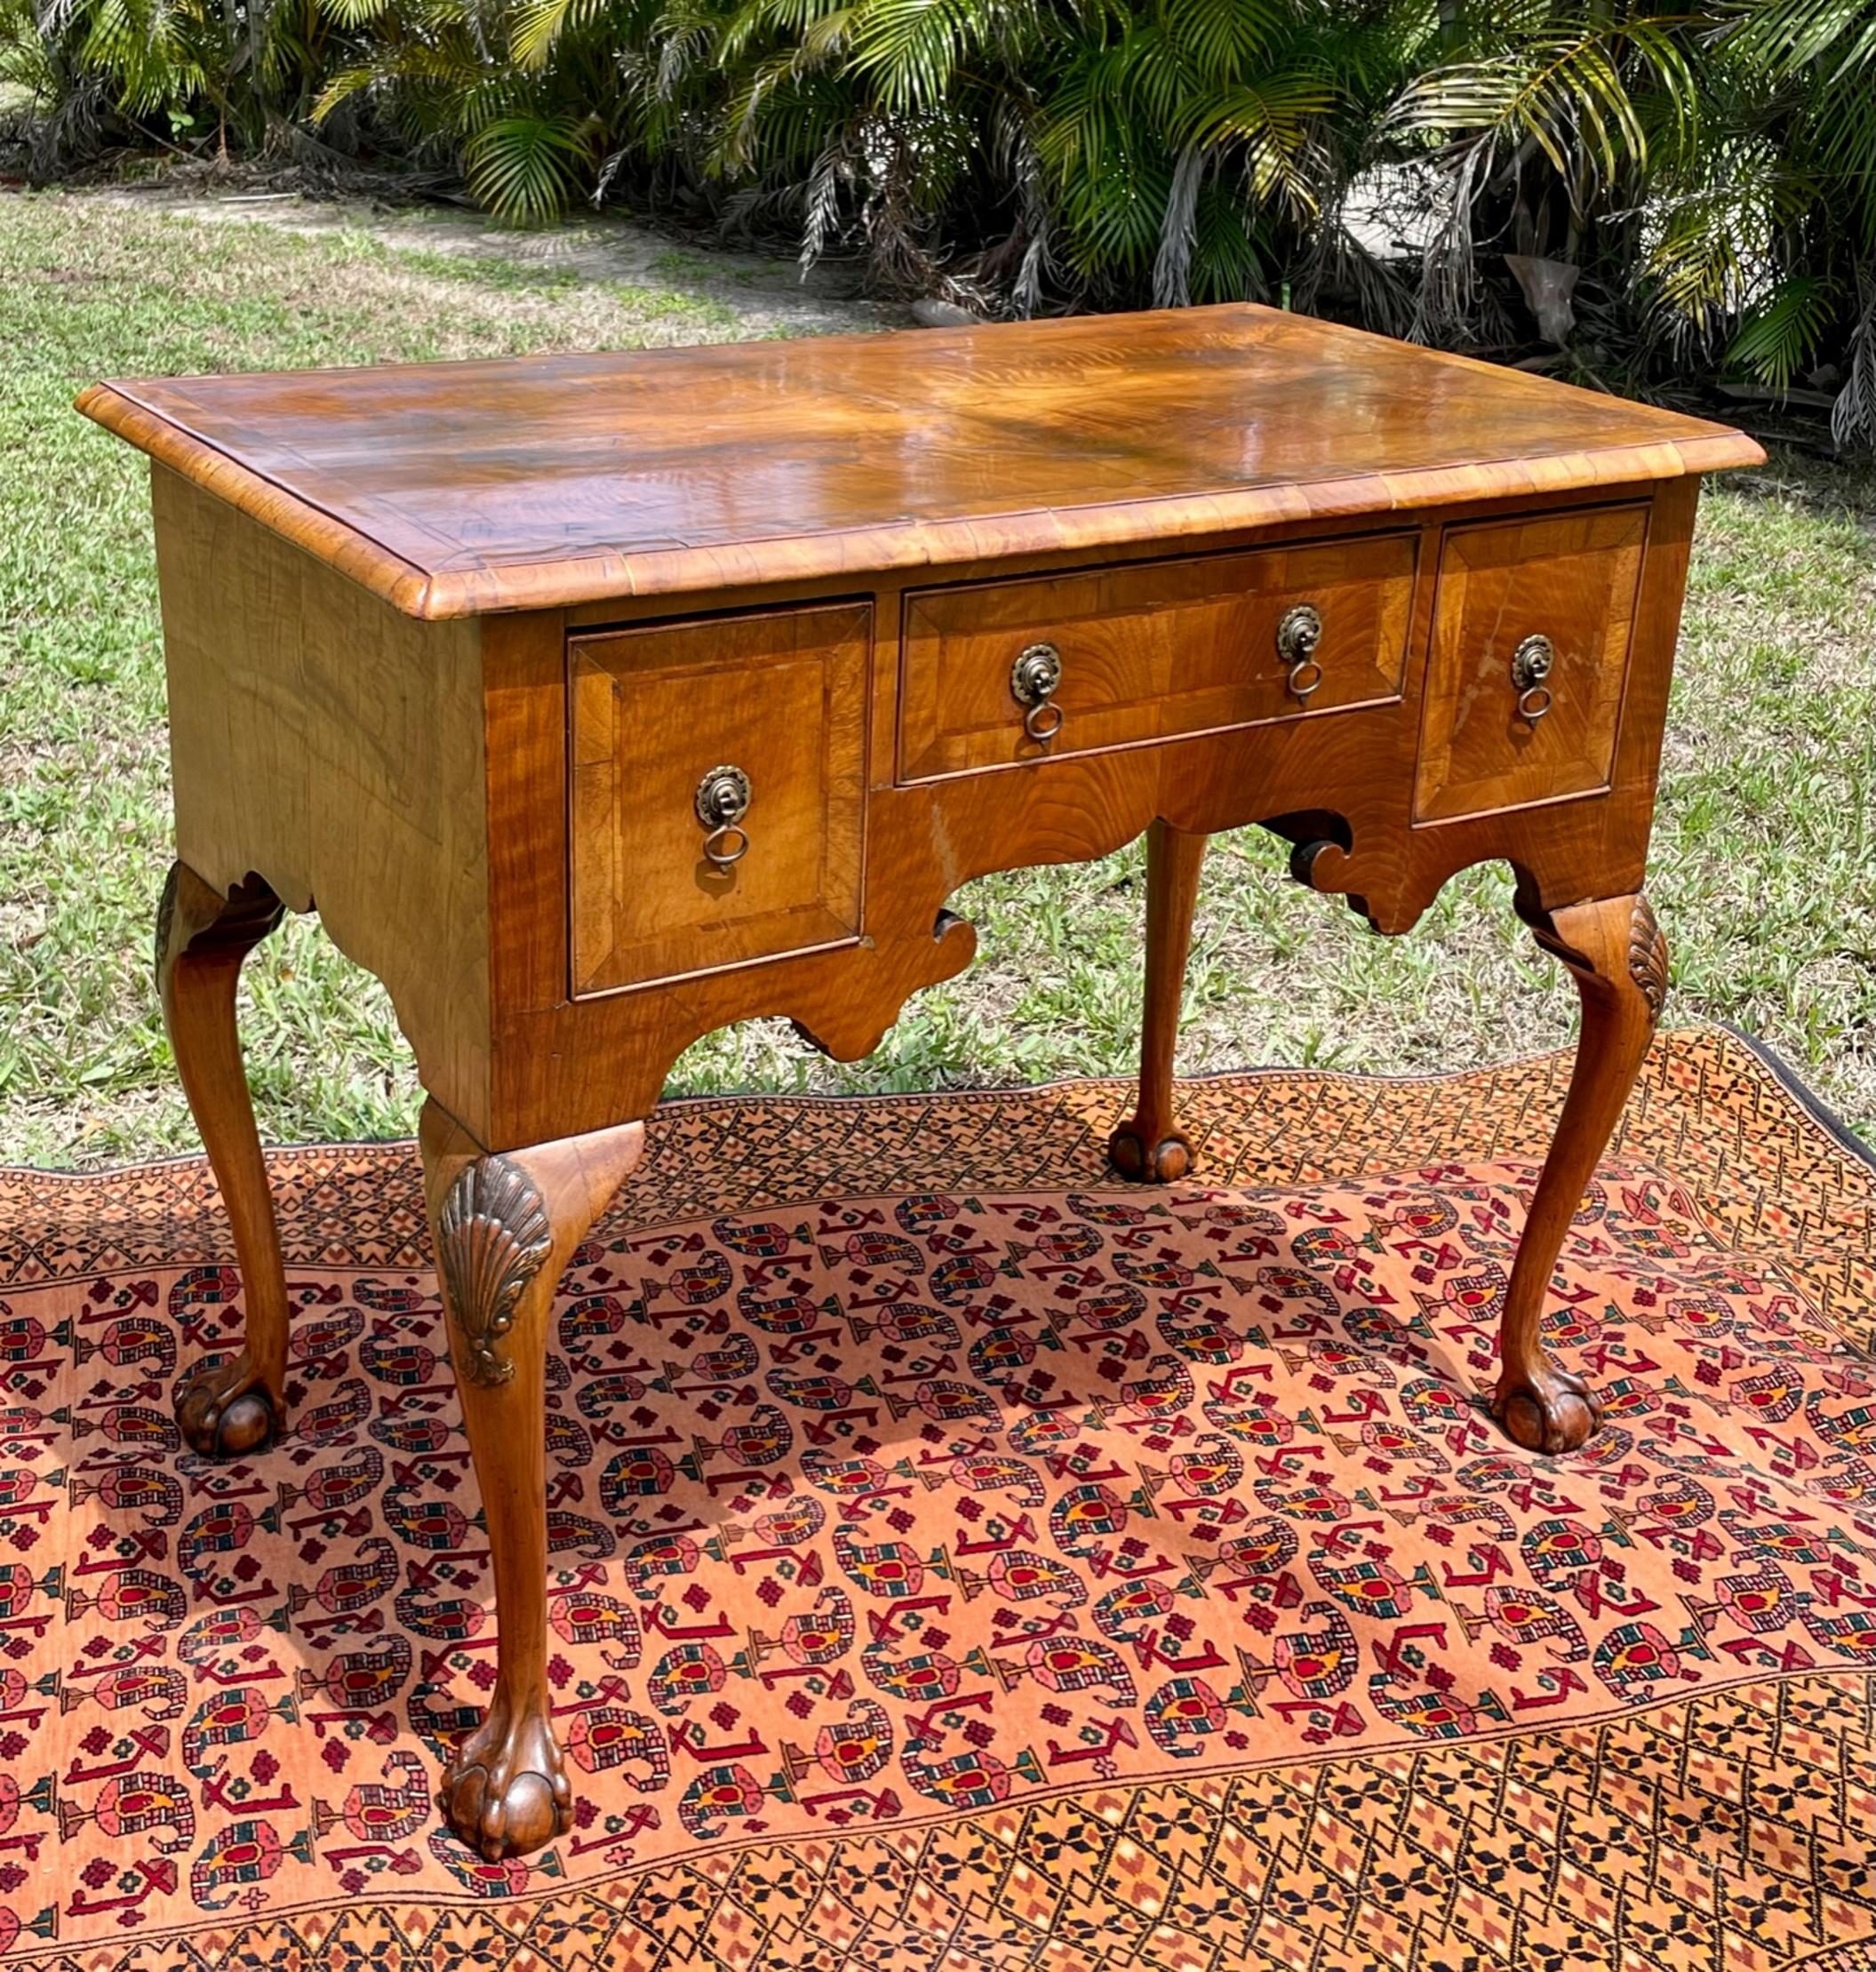 English Period 18th century Queen Anne walnut lowboy.

Refined walnut Lowboy with elegant scalloped apron from the Queen Anne period, about 1740. The molded edge top is quarter veneered with gross banding and with four notched corners. The three